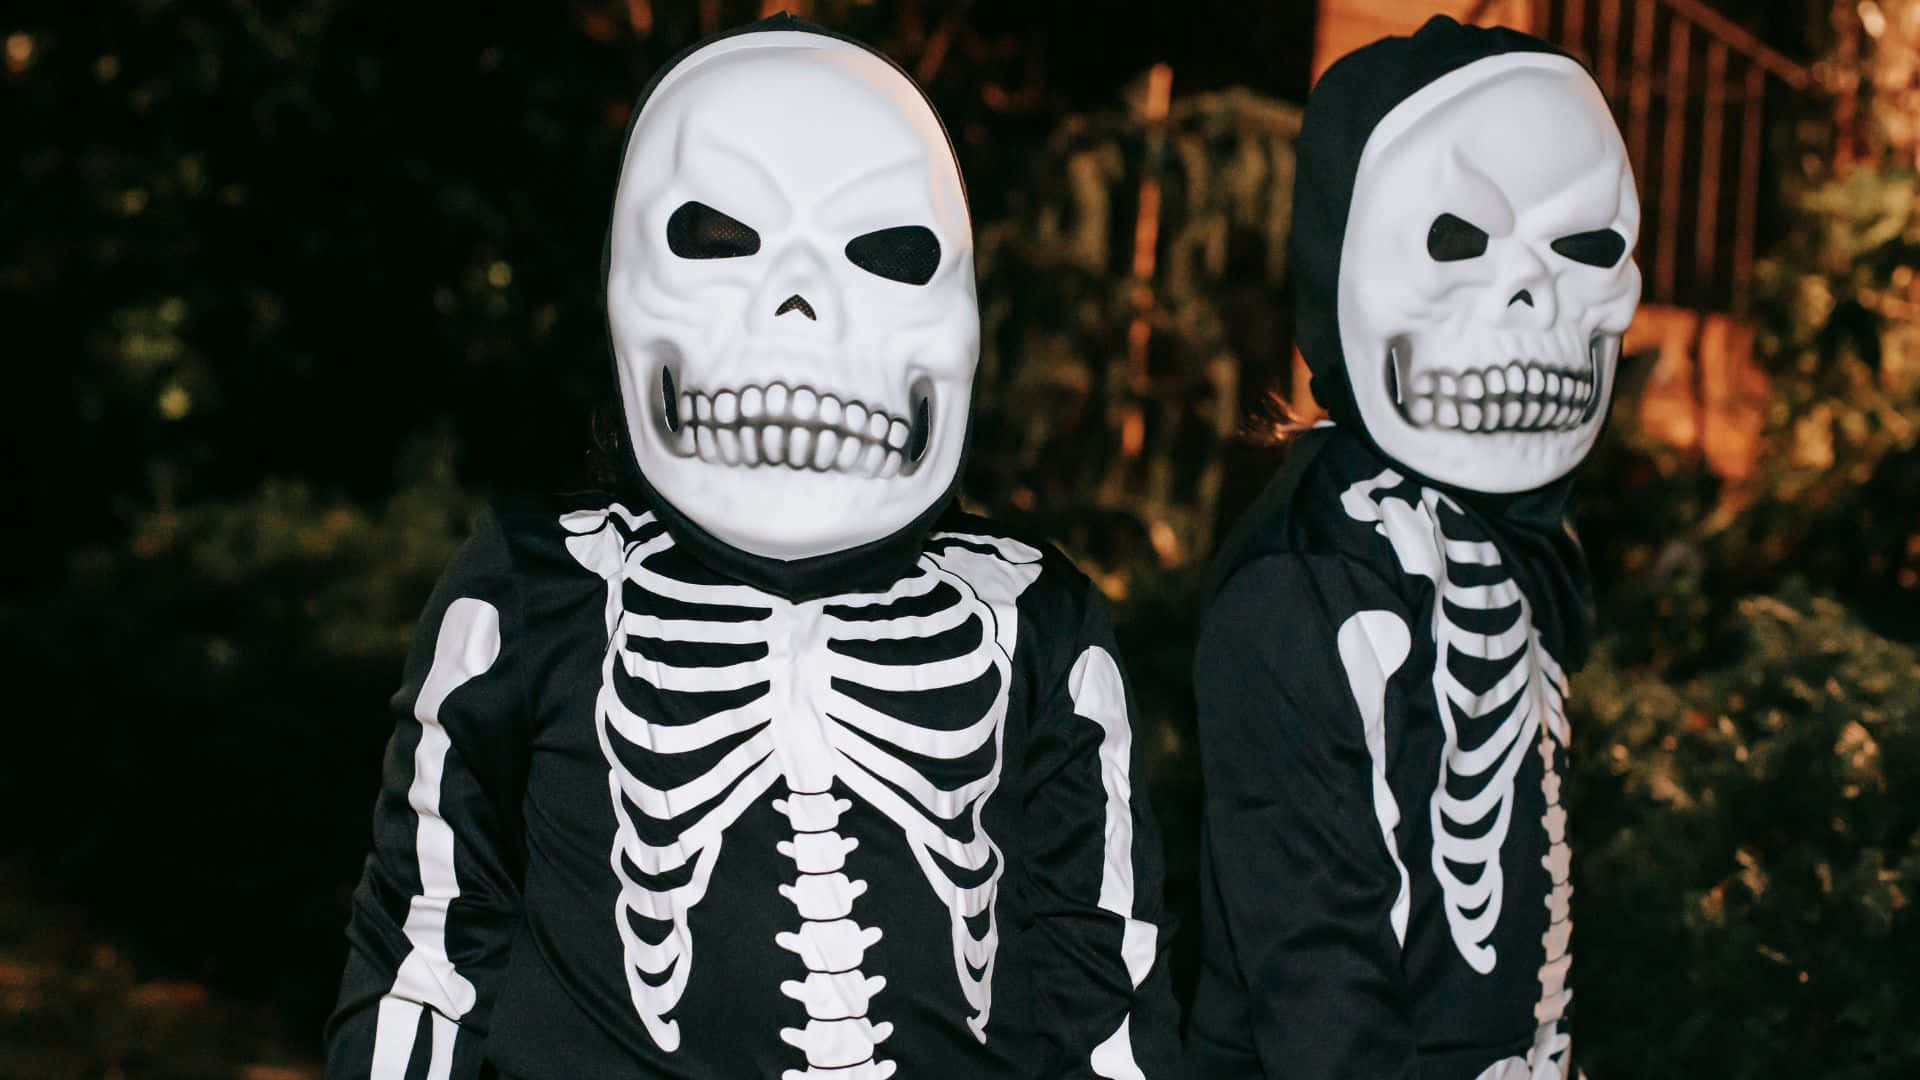 Get Ready for Halloween with Spooky Skeleton Costumes! Wallpaper